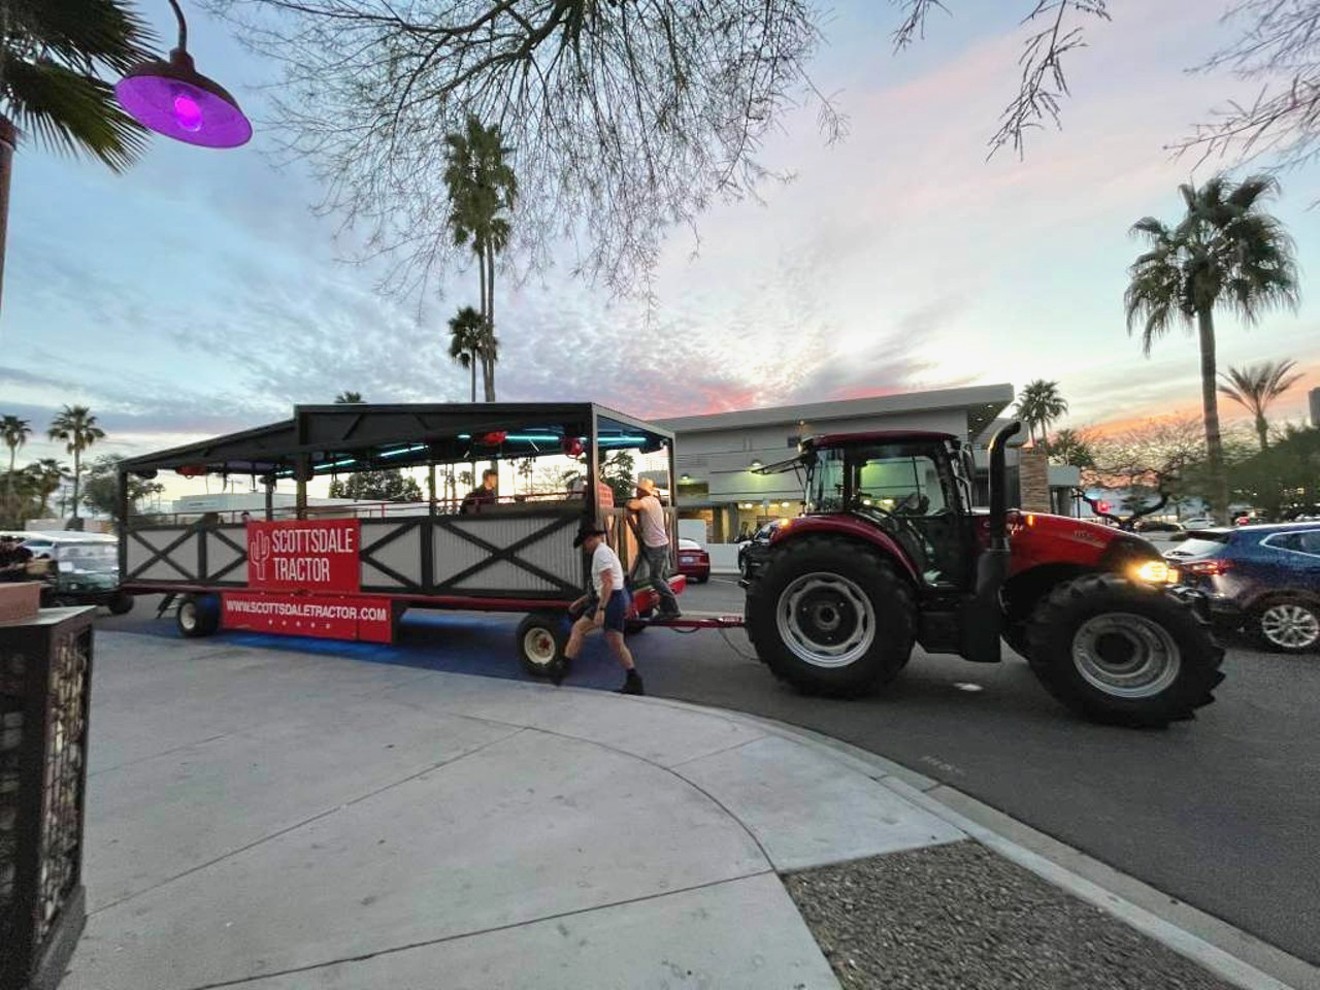 Scottsdale Tractor, a new tractor party tour company in Old Town, has been cited with five misdemeanors.